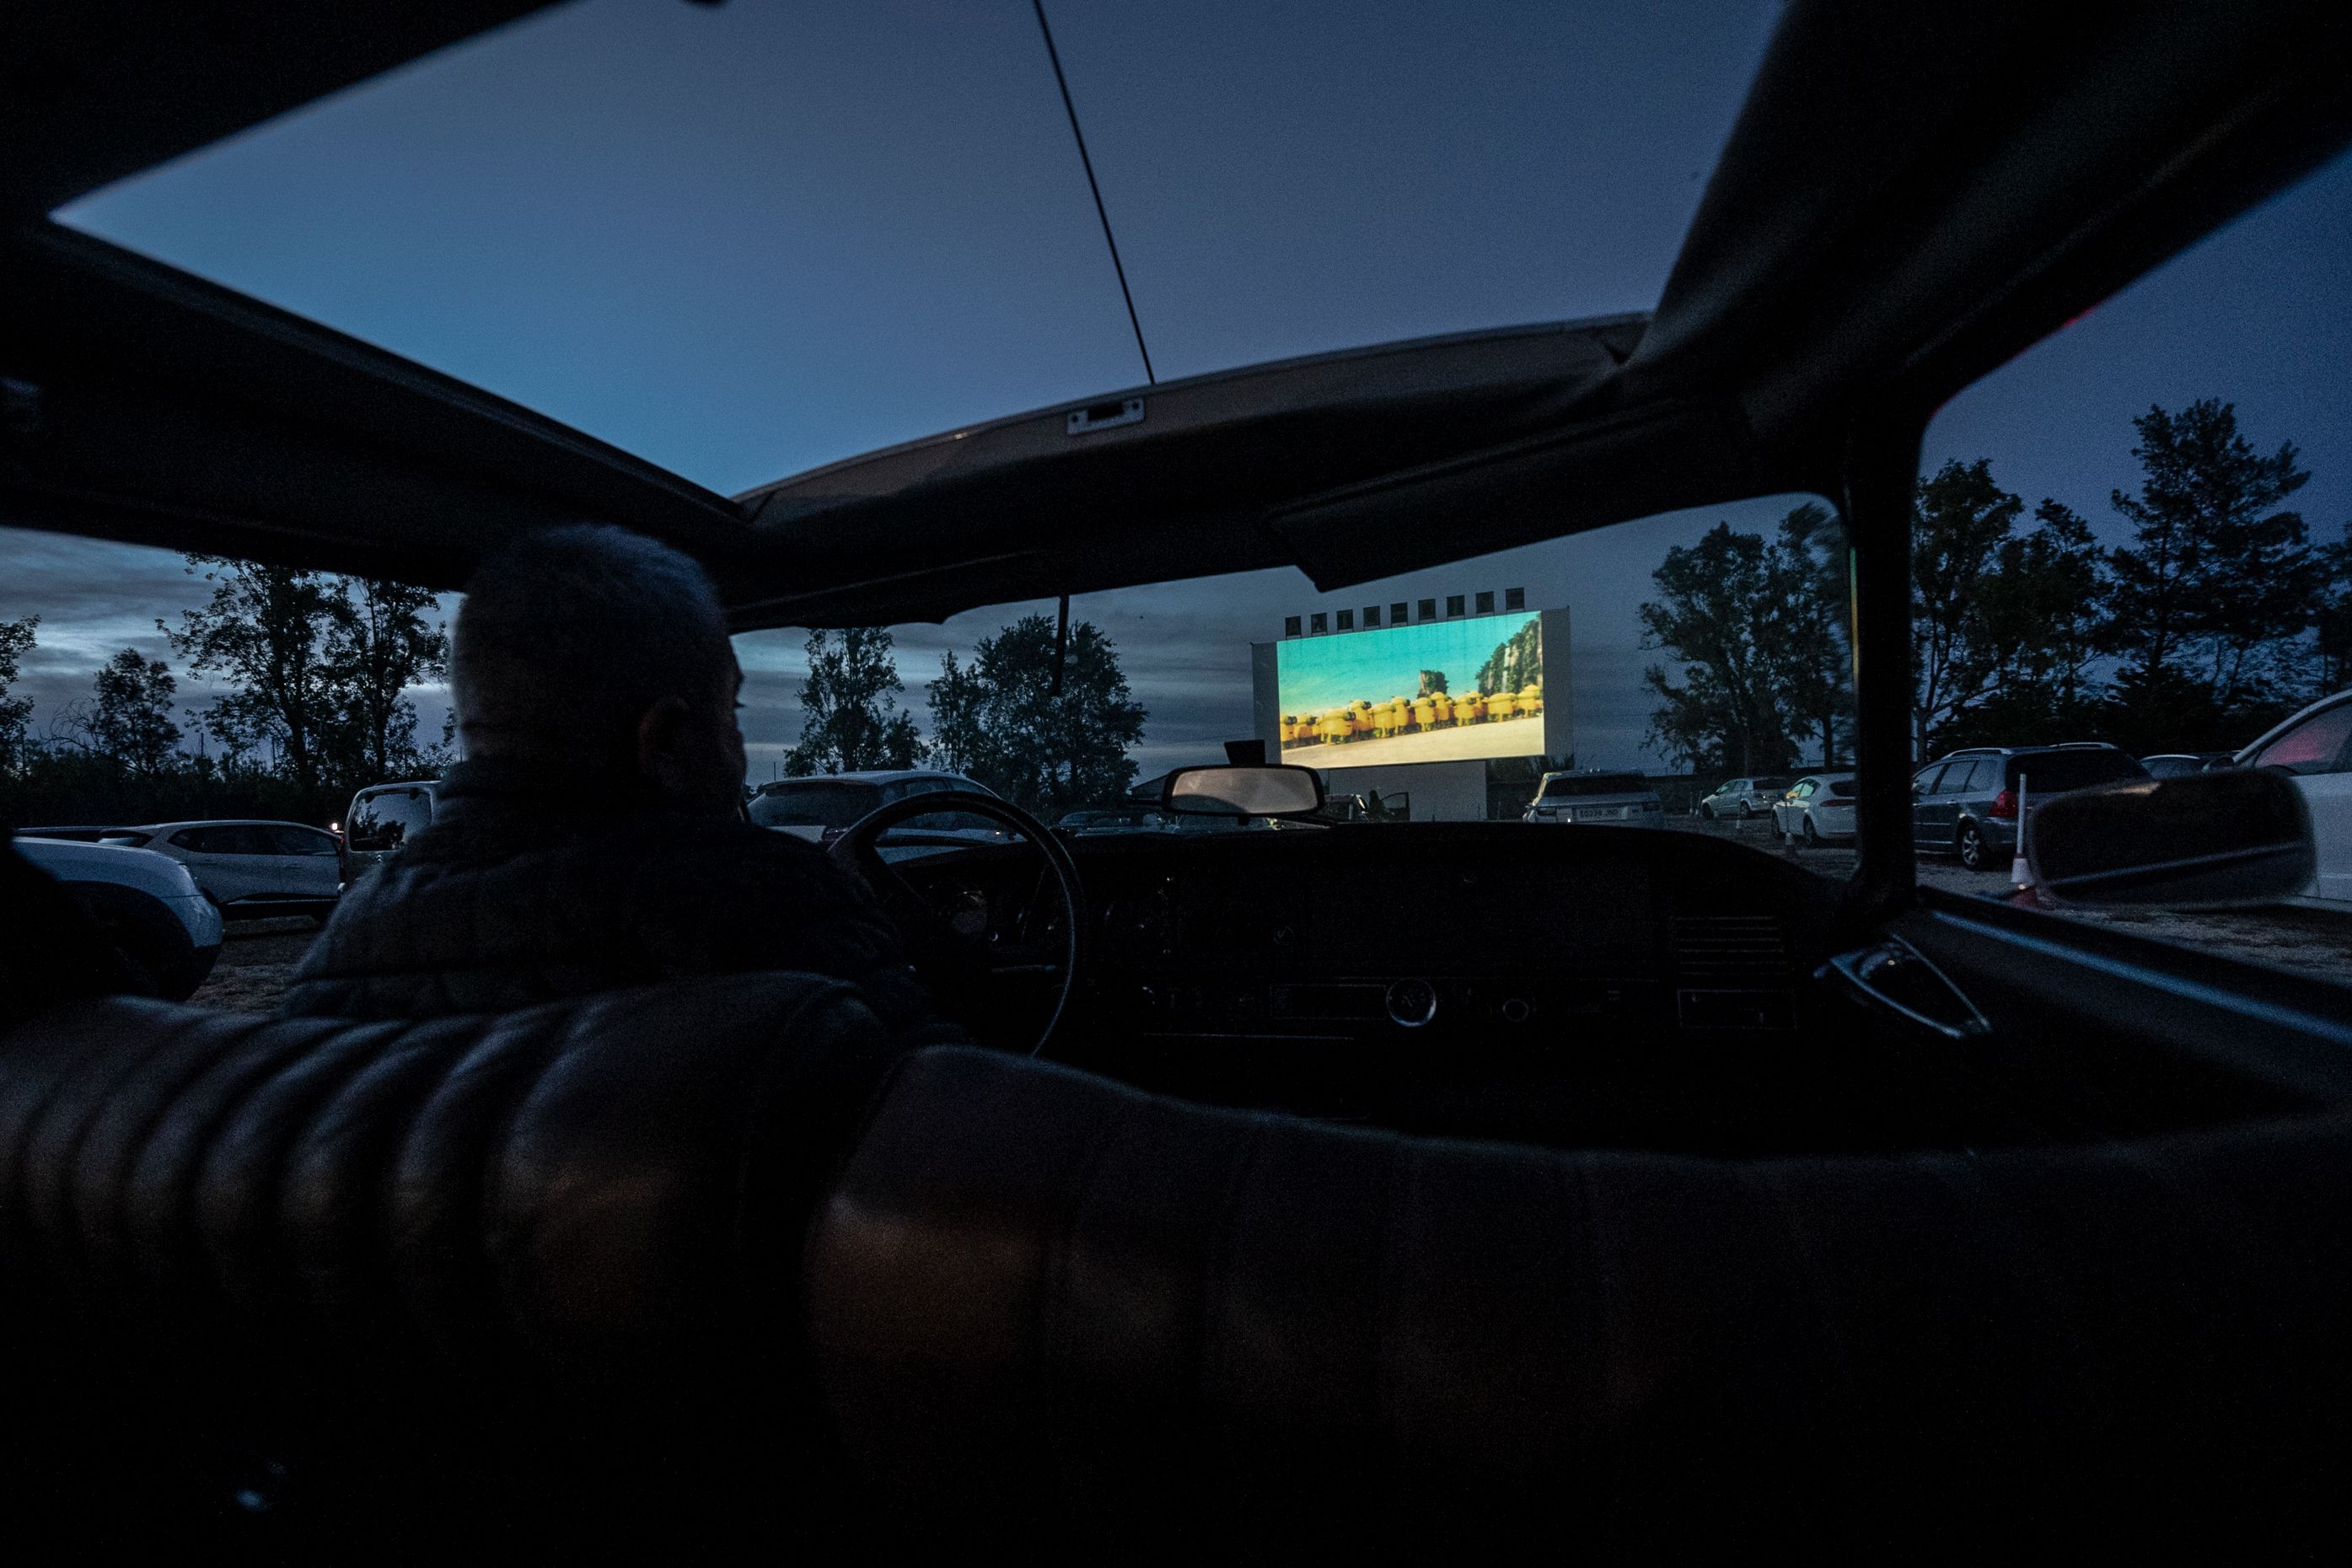 View of the drive-in screen from inside a vehicle at night time